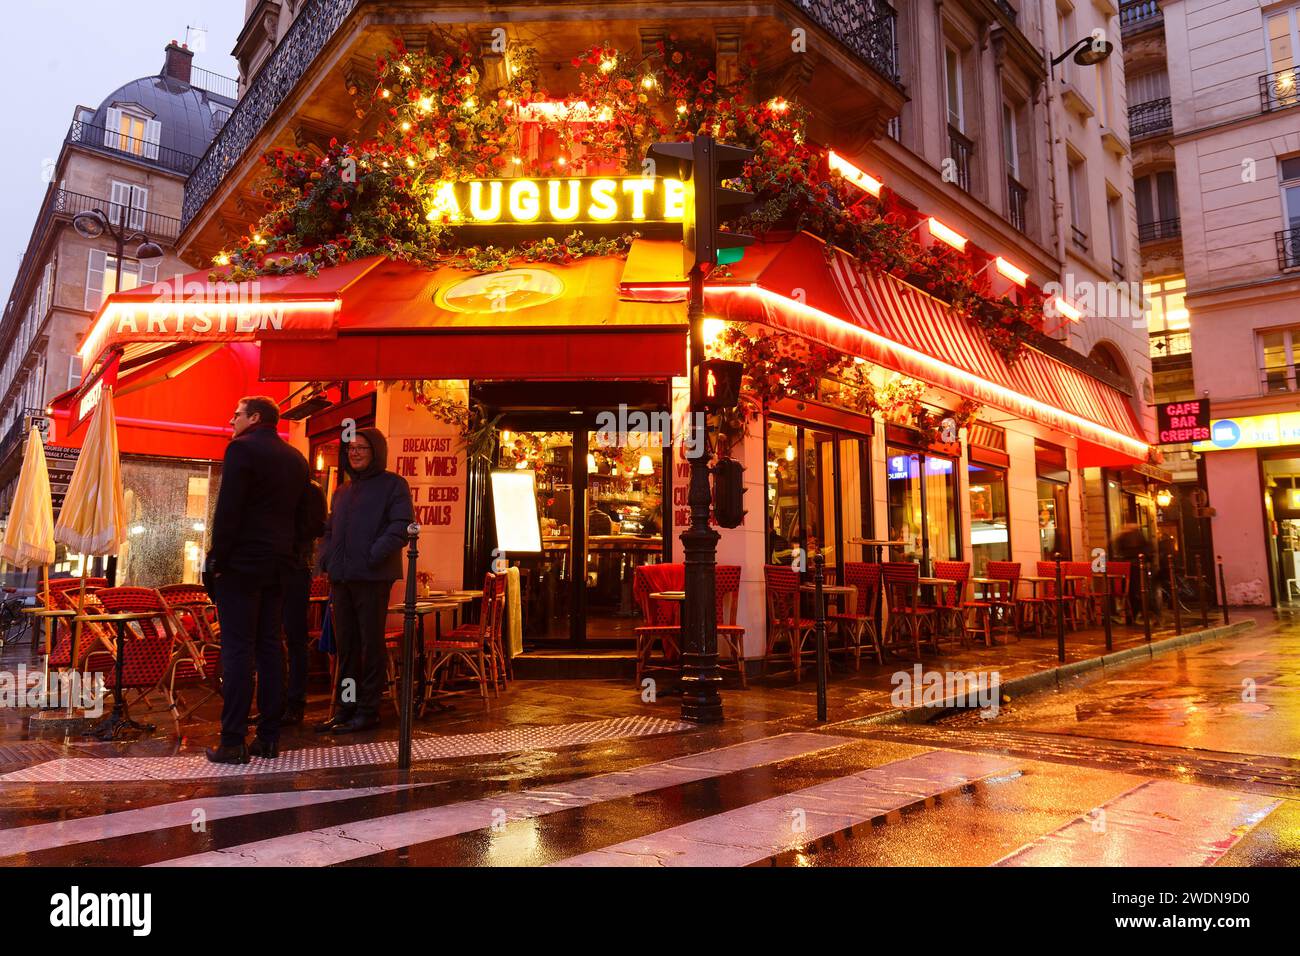 The traditional French cafe Auguste decorated with flowers at rainy ...